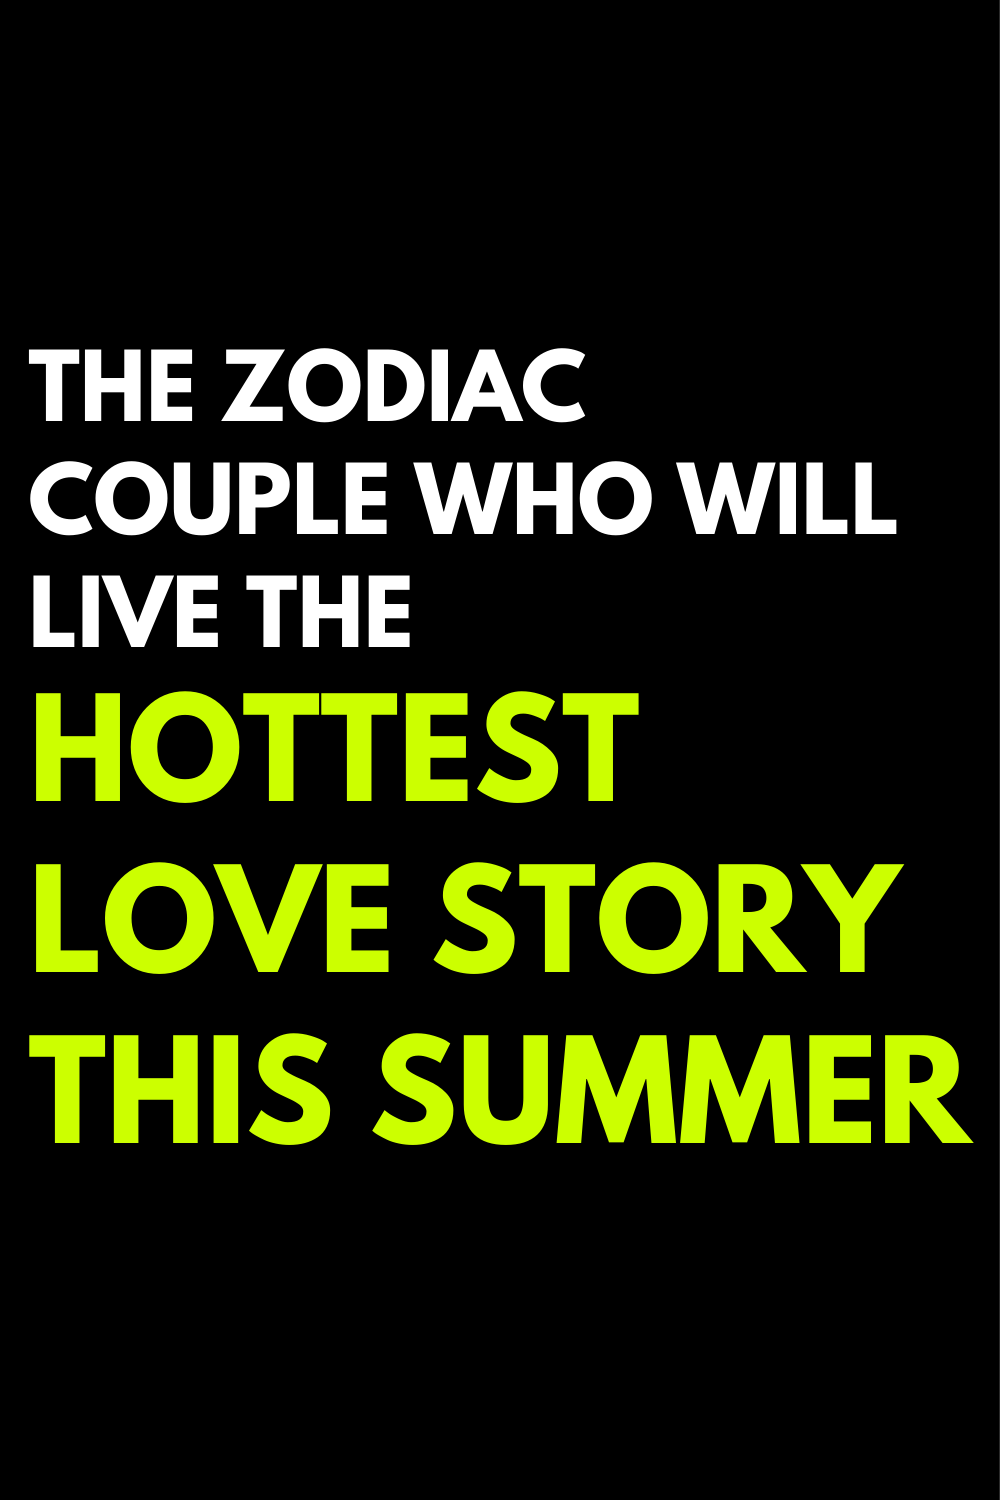 The zodiac couple who will live the hottest love story this summer